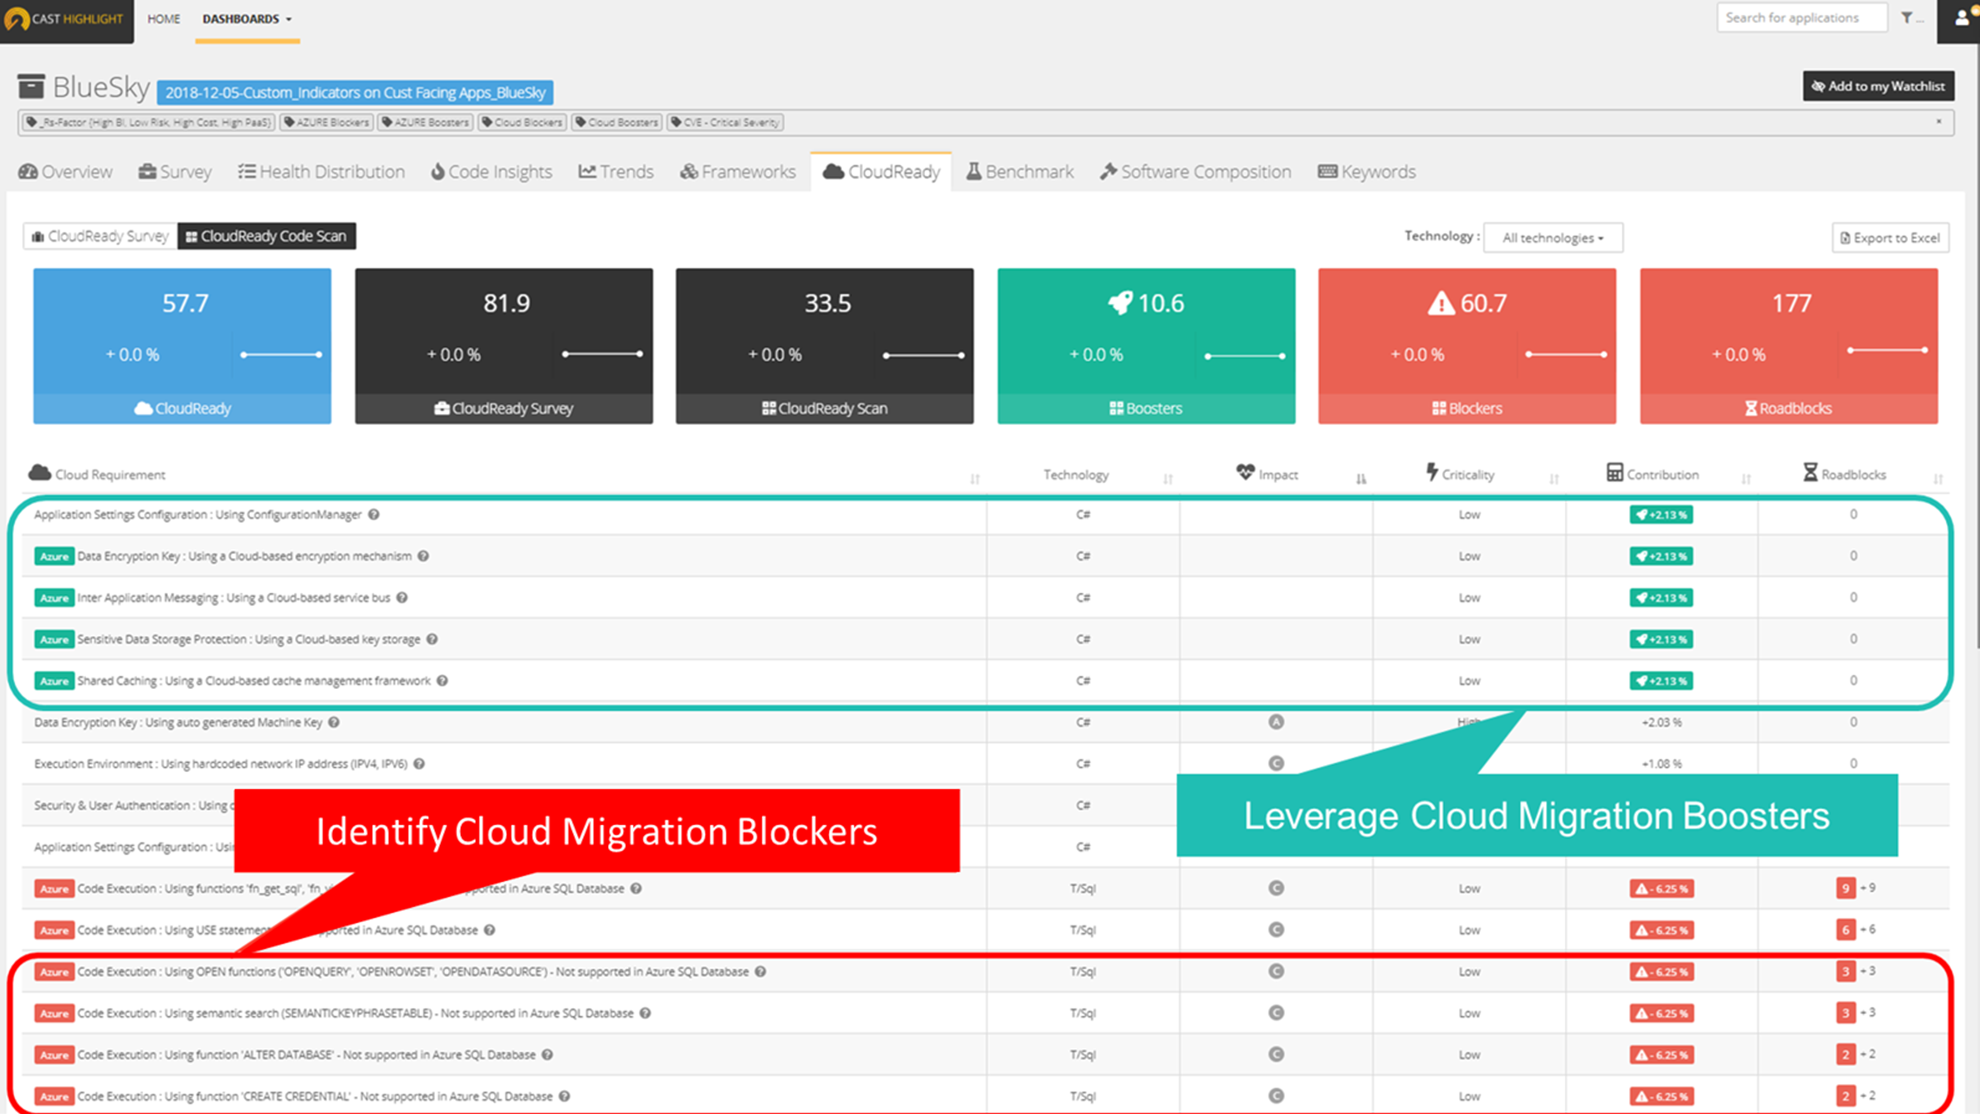 Cloud Migration Boosters and Blockers